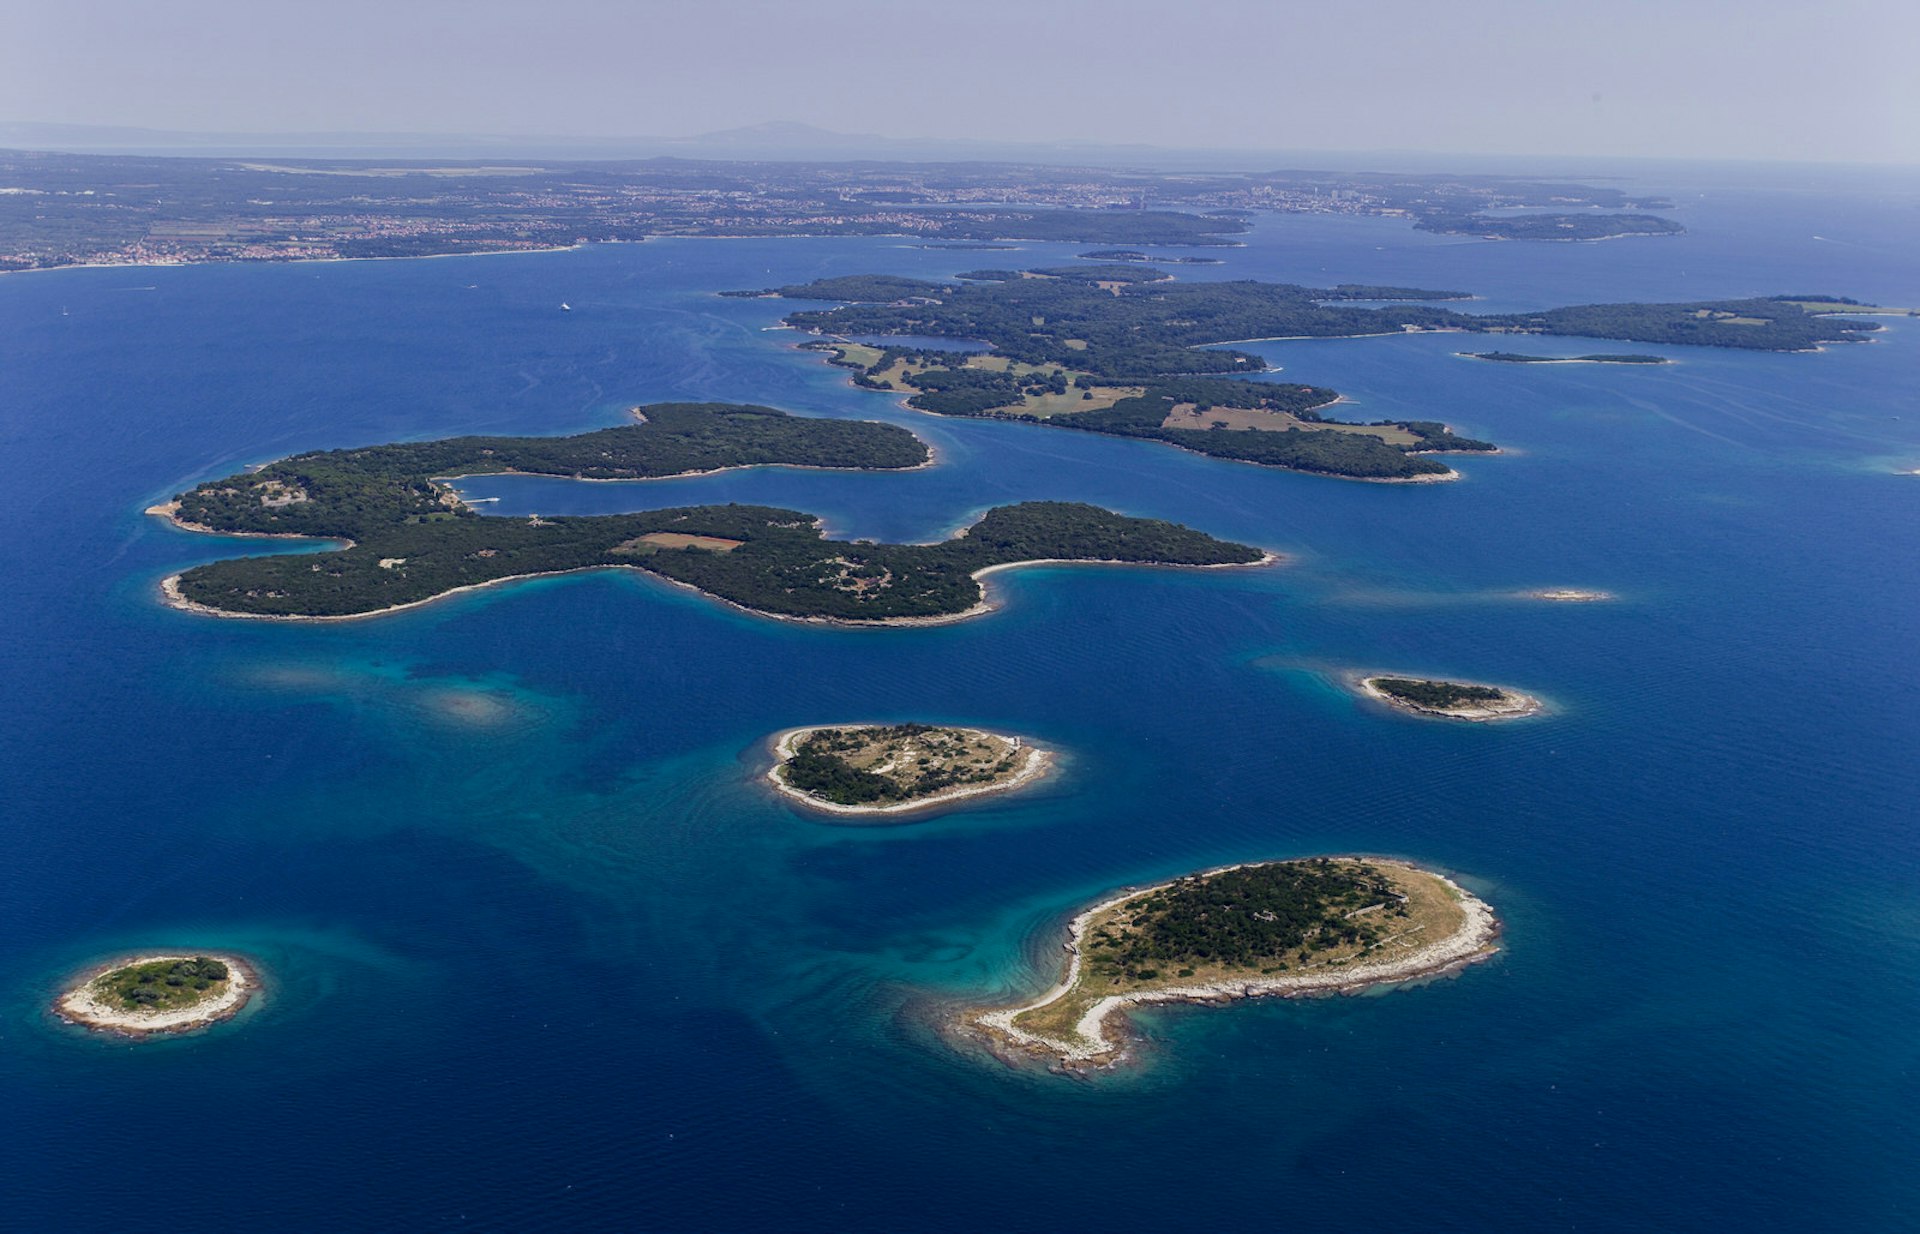 Aerial shot of a dozen small wooded islands, fringed with white beaches